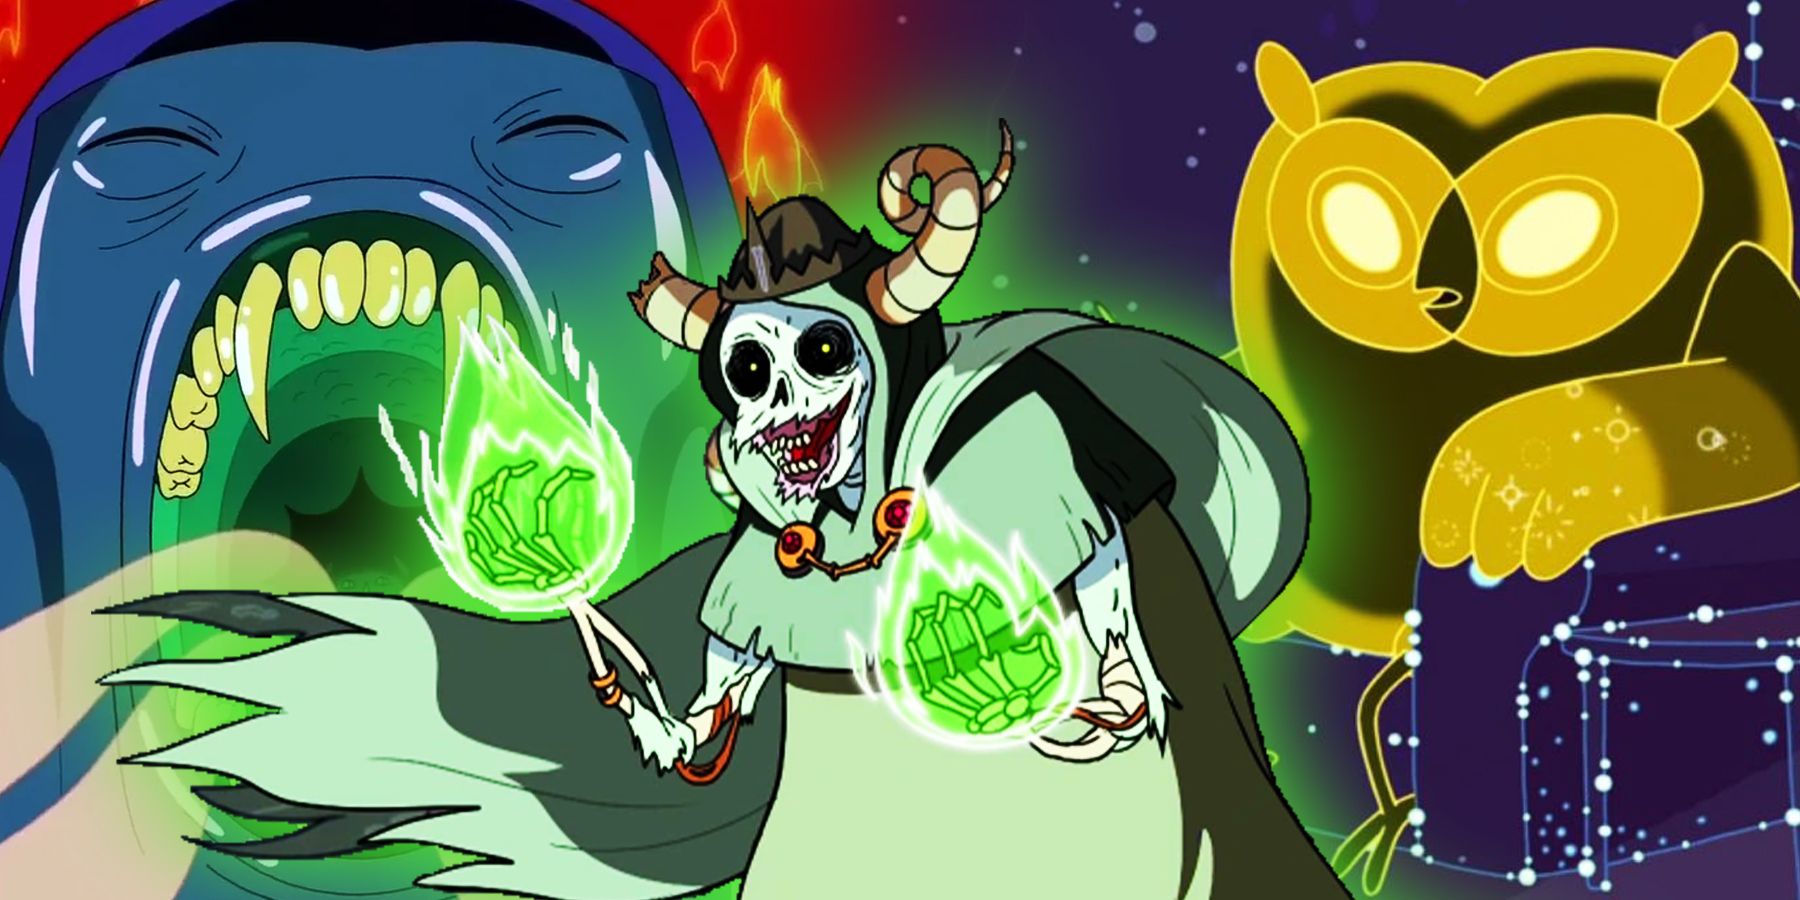 Hunson Abadeer, the Lich and the Cosmic Owl from show Adventure Time